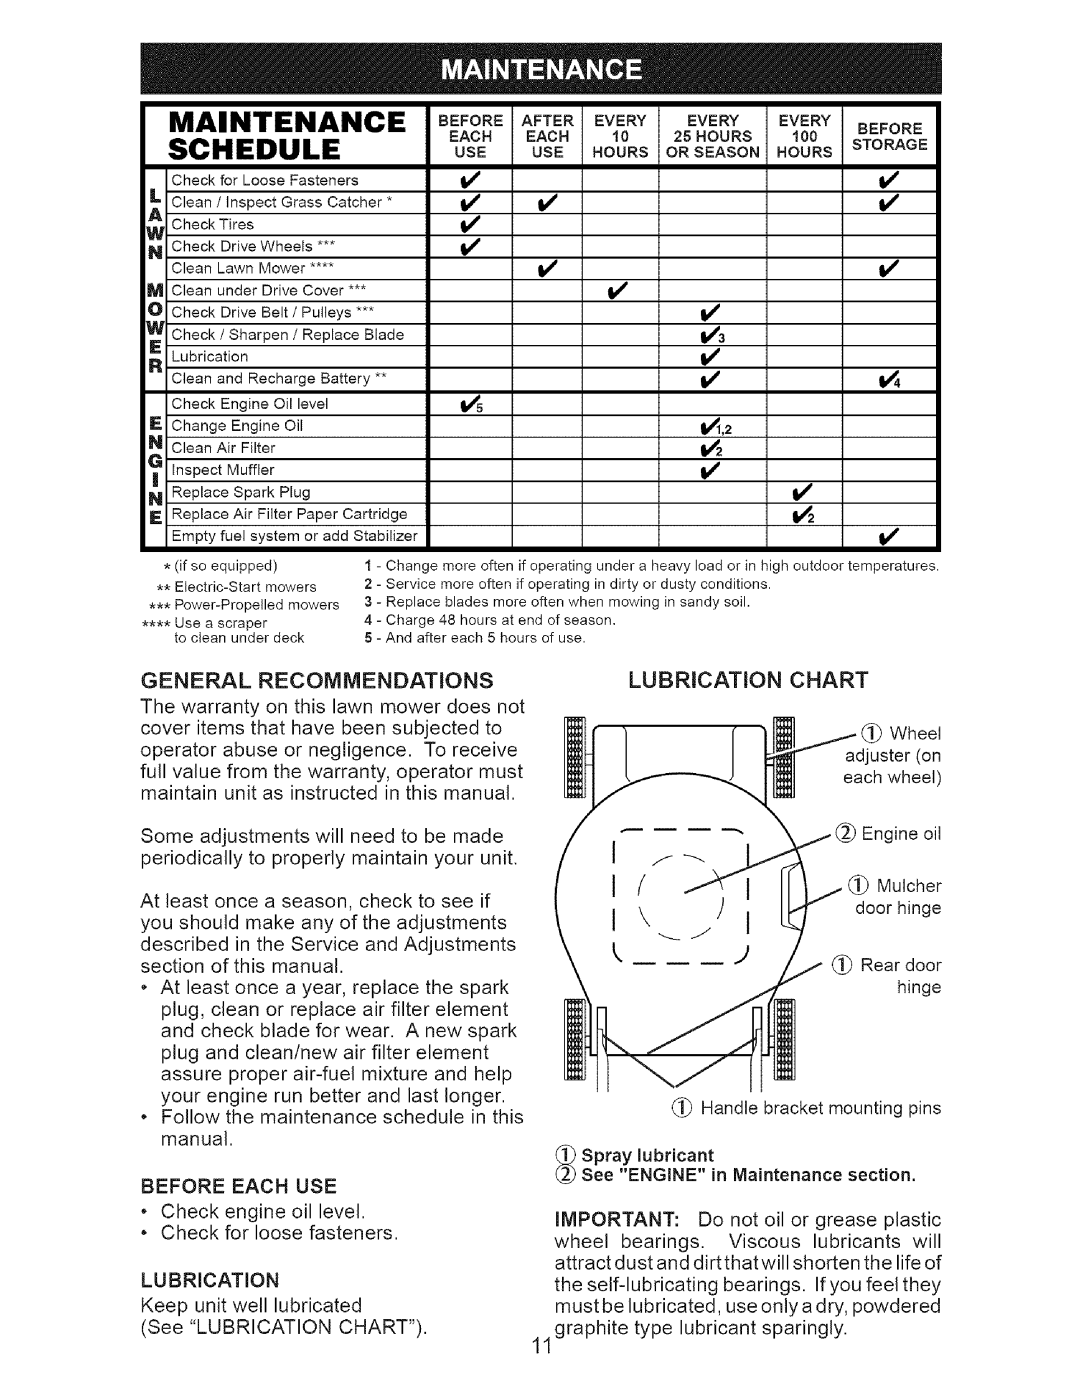 Craftsman 917.3882 owner manual Maintenance, Schedule, Lubrication, Chart, General Recommendations 